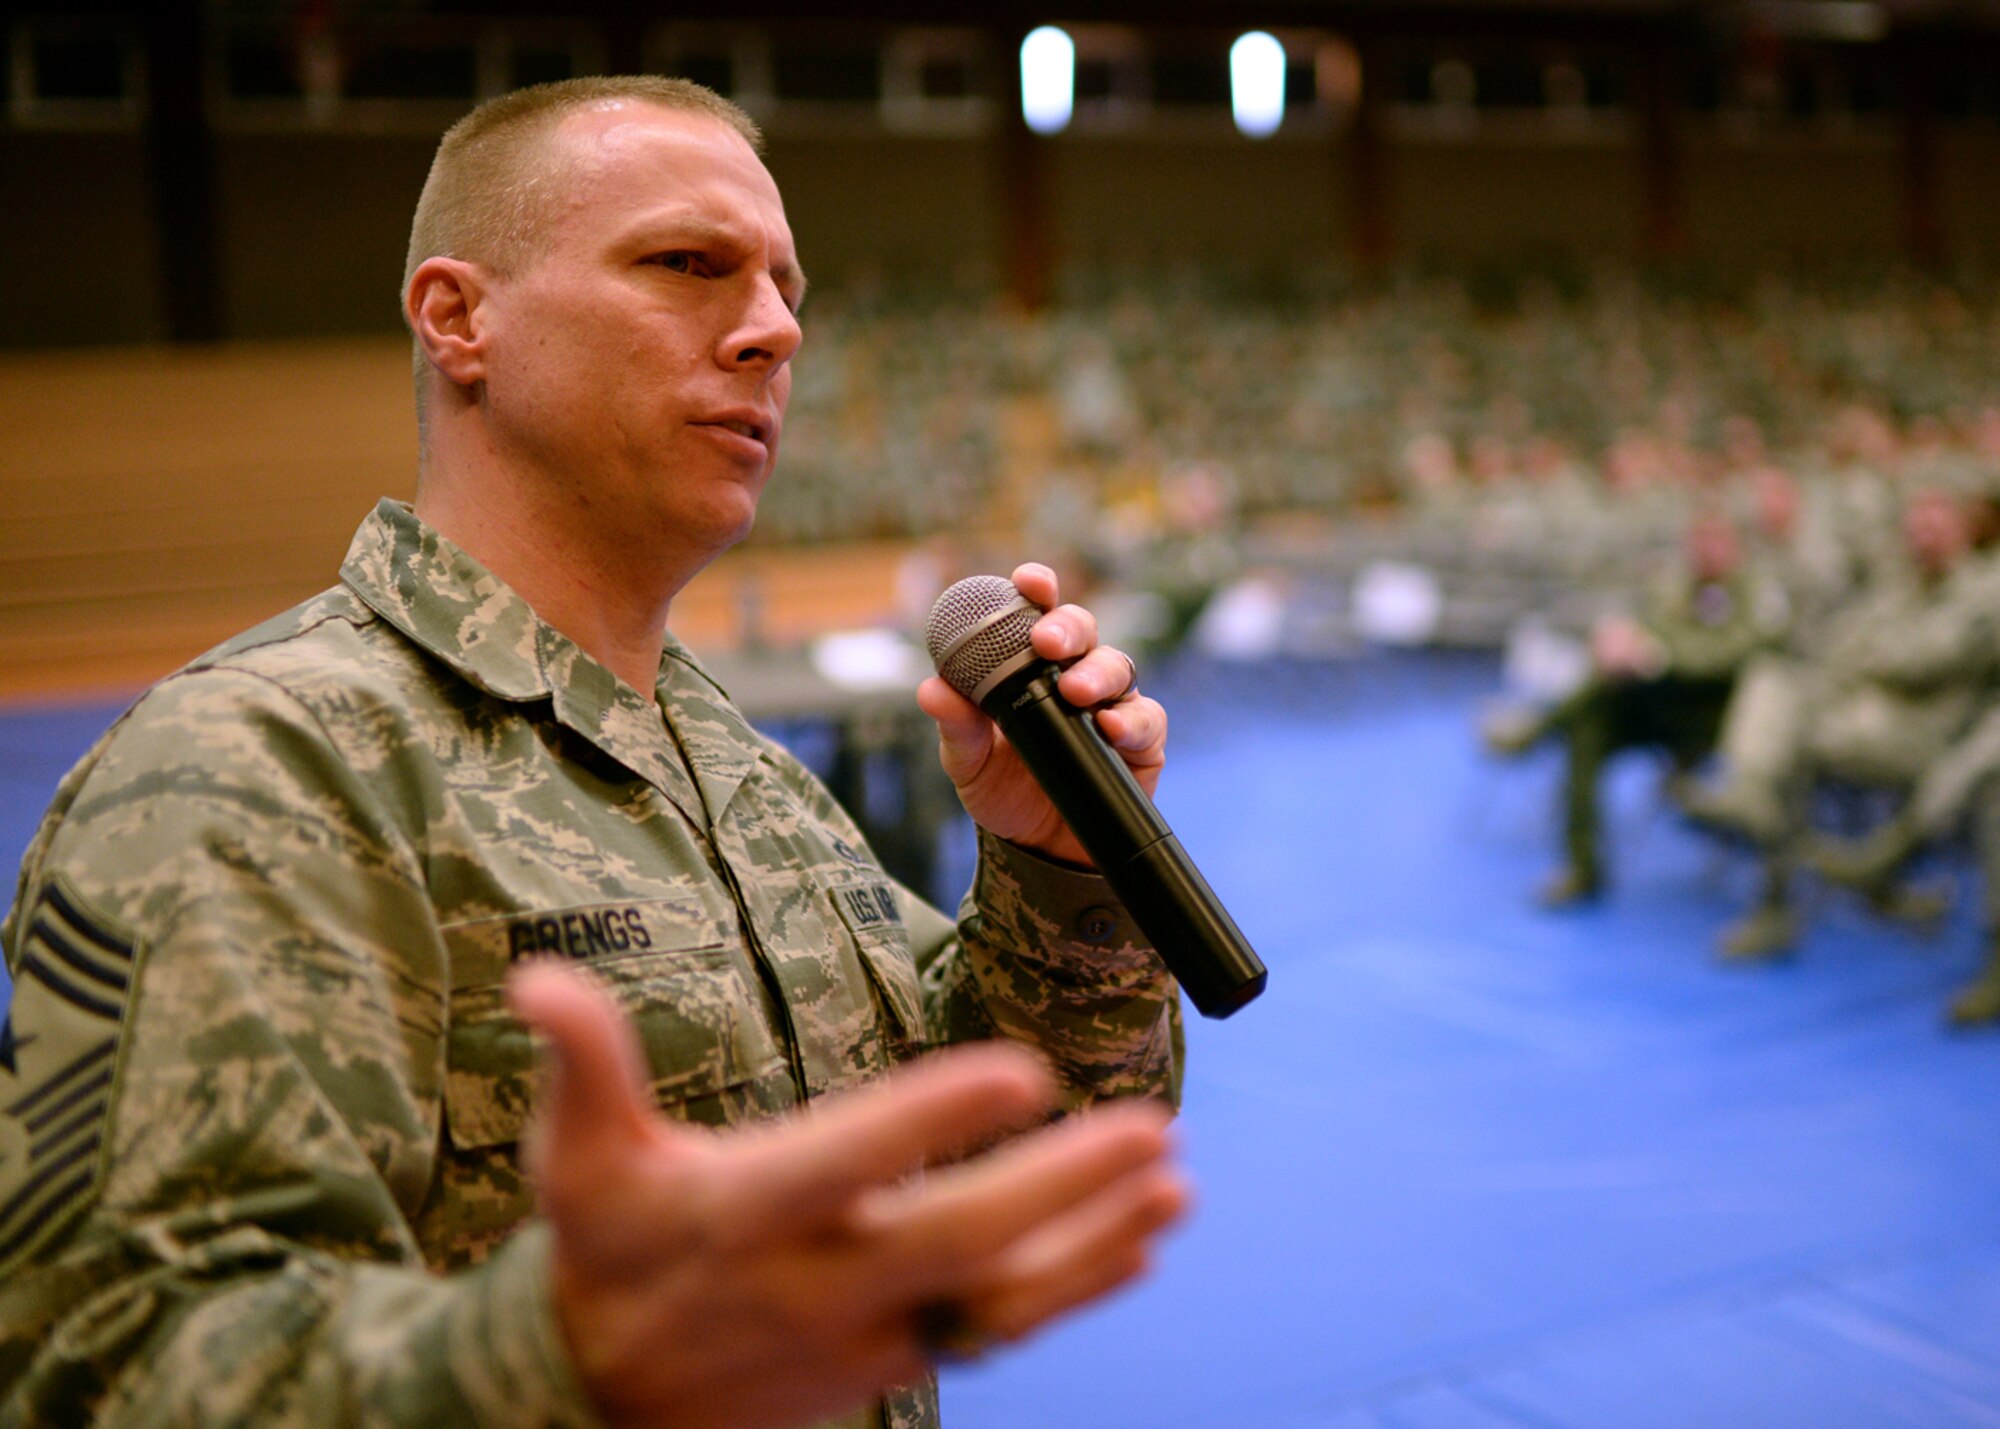 U.S. Air Force Chief Master Sgt. Matt Grengs, 52nd Fighter Wing command chief from Longmont, Colo., talks with base Airmen during a mass briefing in the Skelton Memorial Fitness Center at Spangdahlem Air Base, Germany, March 26, 2014. Base leadership often discusses current issues affecting Airmen and shares information about the future of the Air Force during these commander’s calls. (U.S. Air Force photo by Staff Sgt. Daryl Knee/Released)